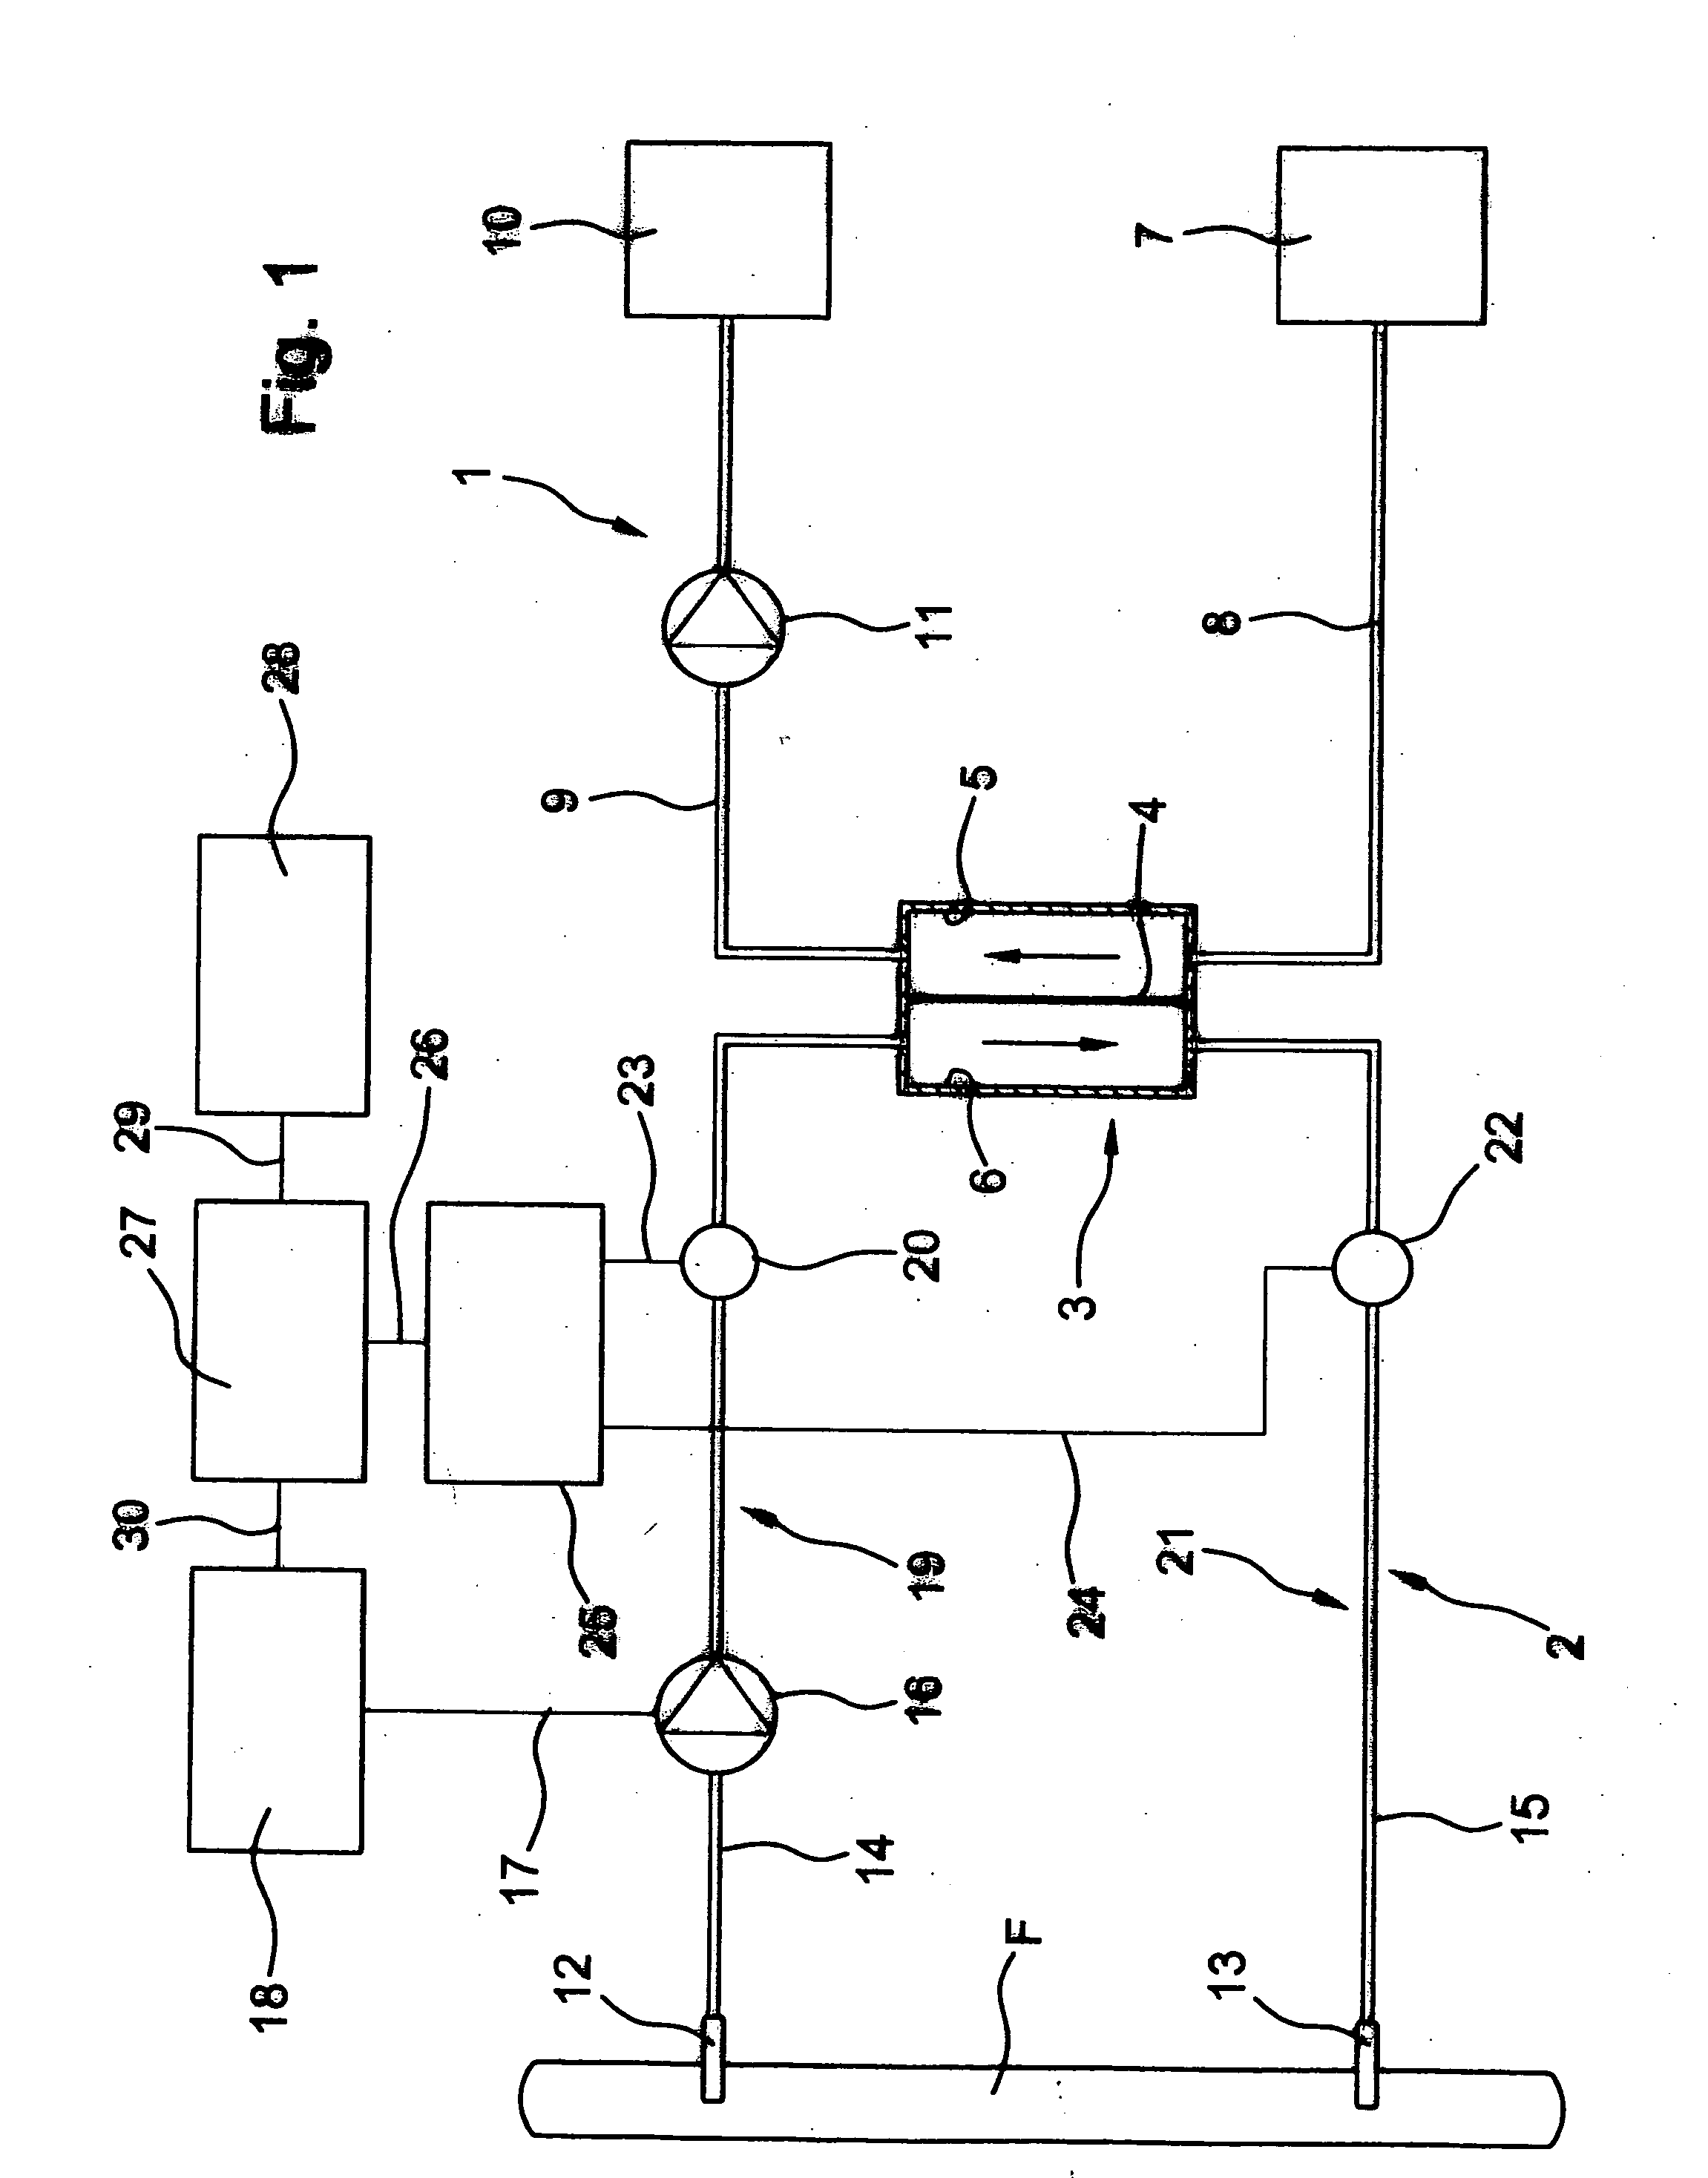 Method and device for determining blood flow in a vascular access